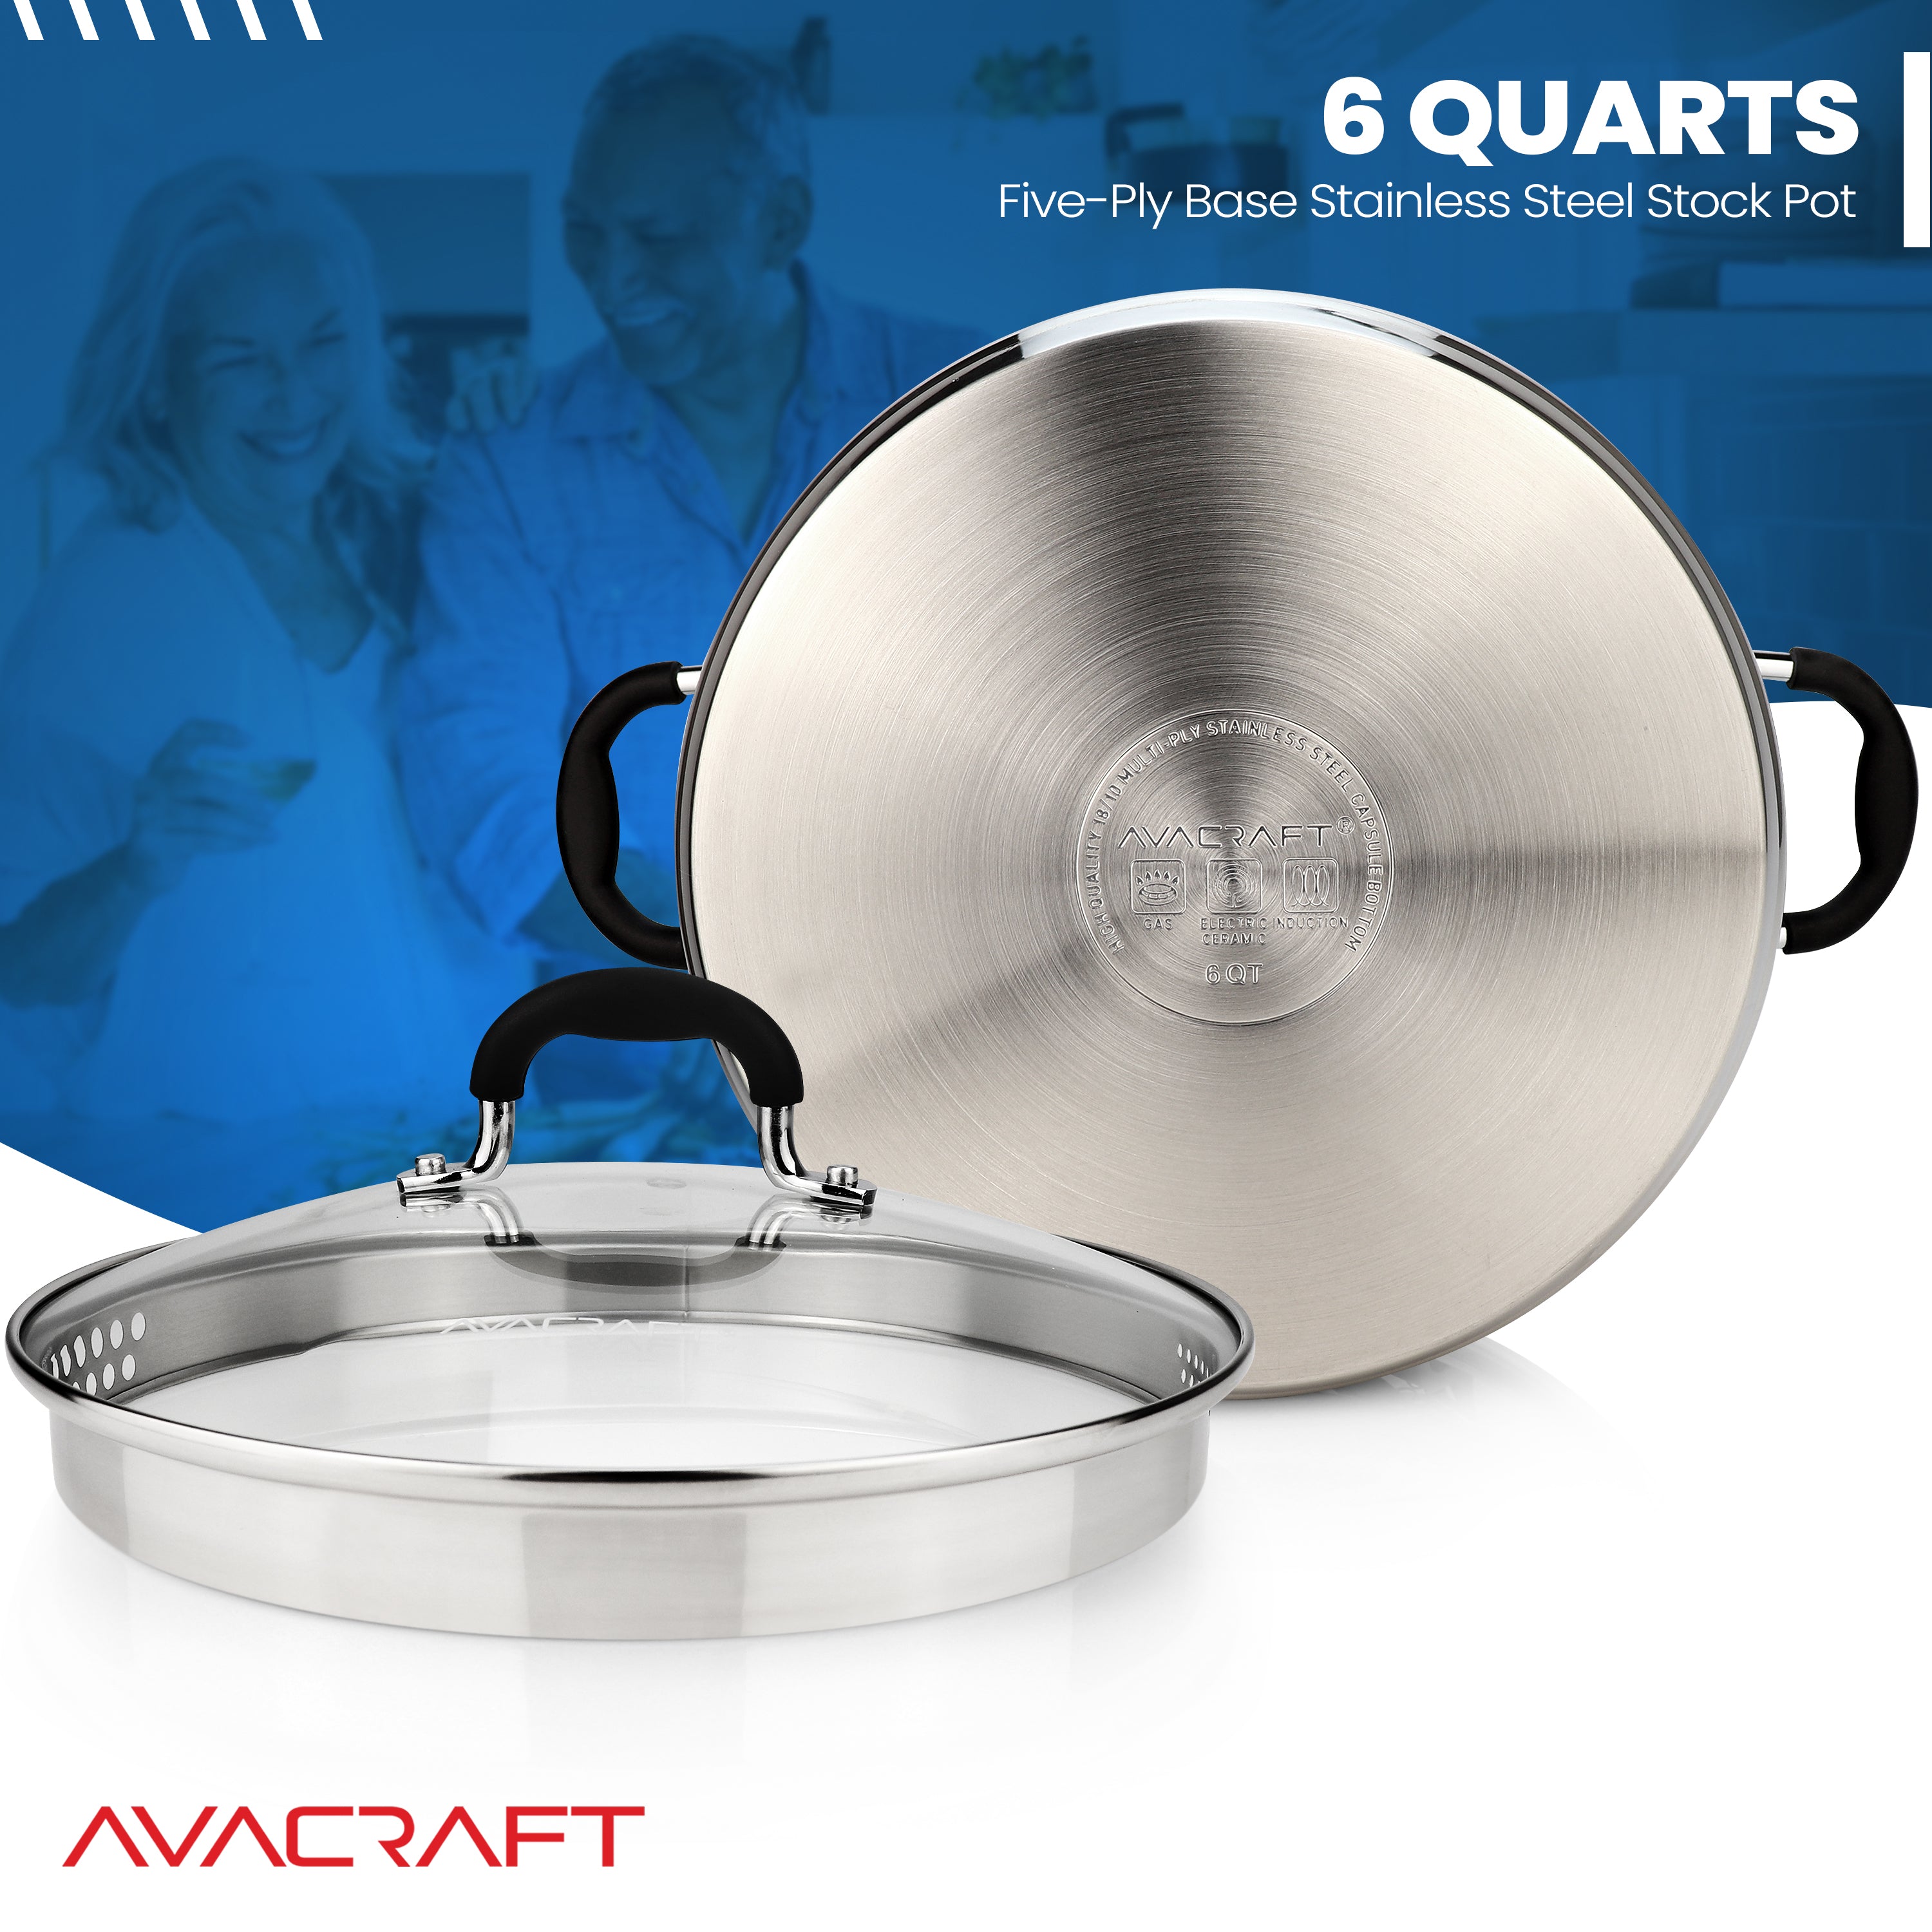 AVACRAFT Stainless Steel Saucepan with Glass Strainer Lid, Two Side Sp